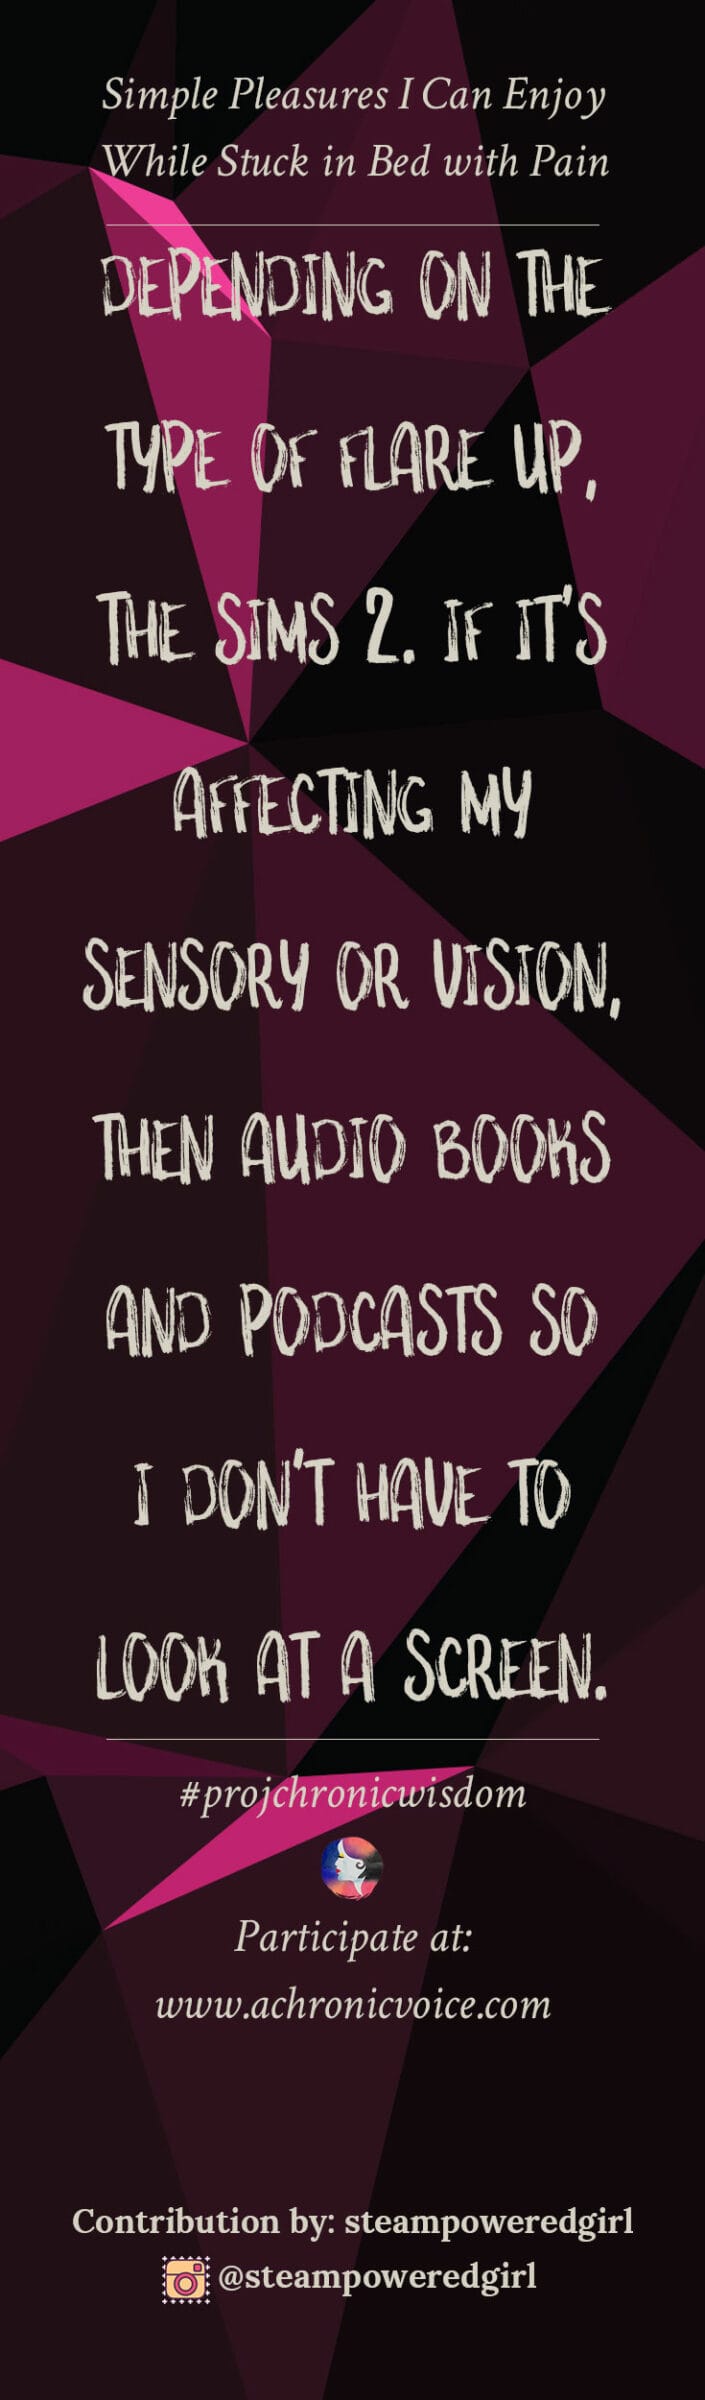 "Depending on the type of flare up, The Sims 2. If it's affecting my sensory or vision, then audio books and podcasts so I don't have to look at a screen." - steampoweredgirl | Share your thoughts at: www.achronicvoice.com